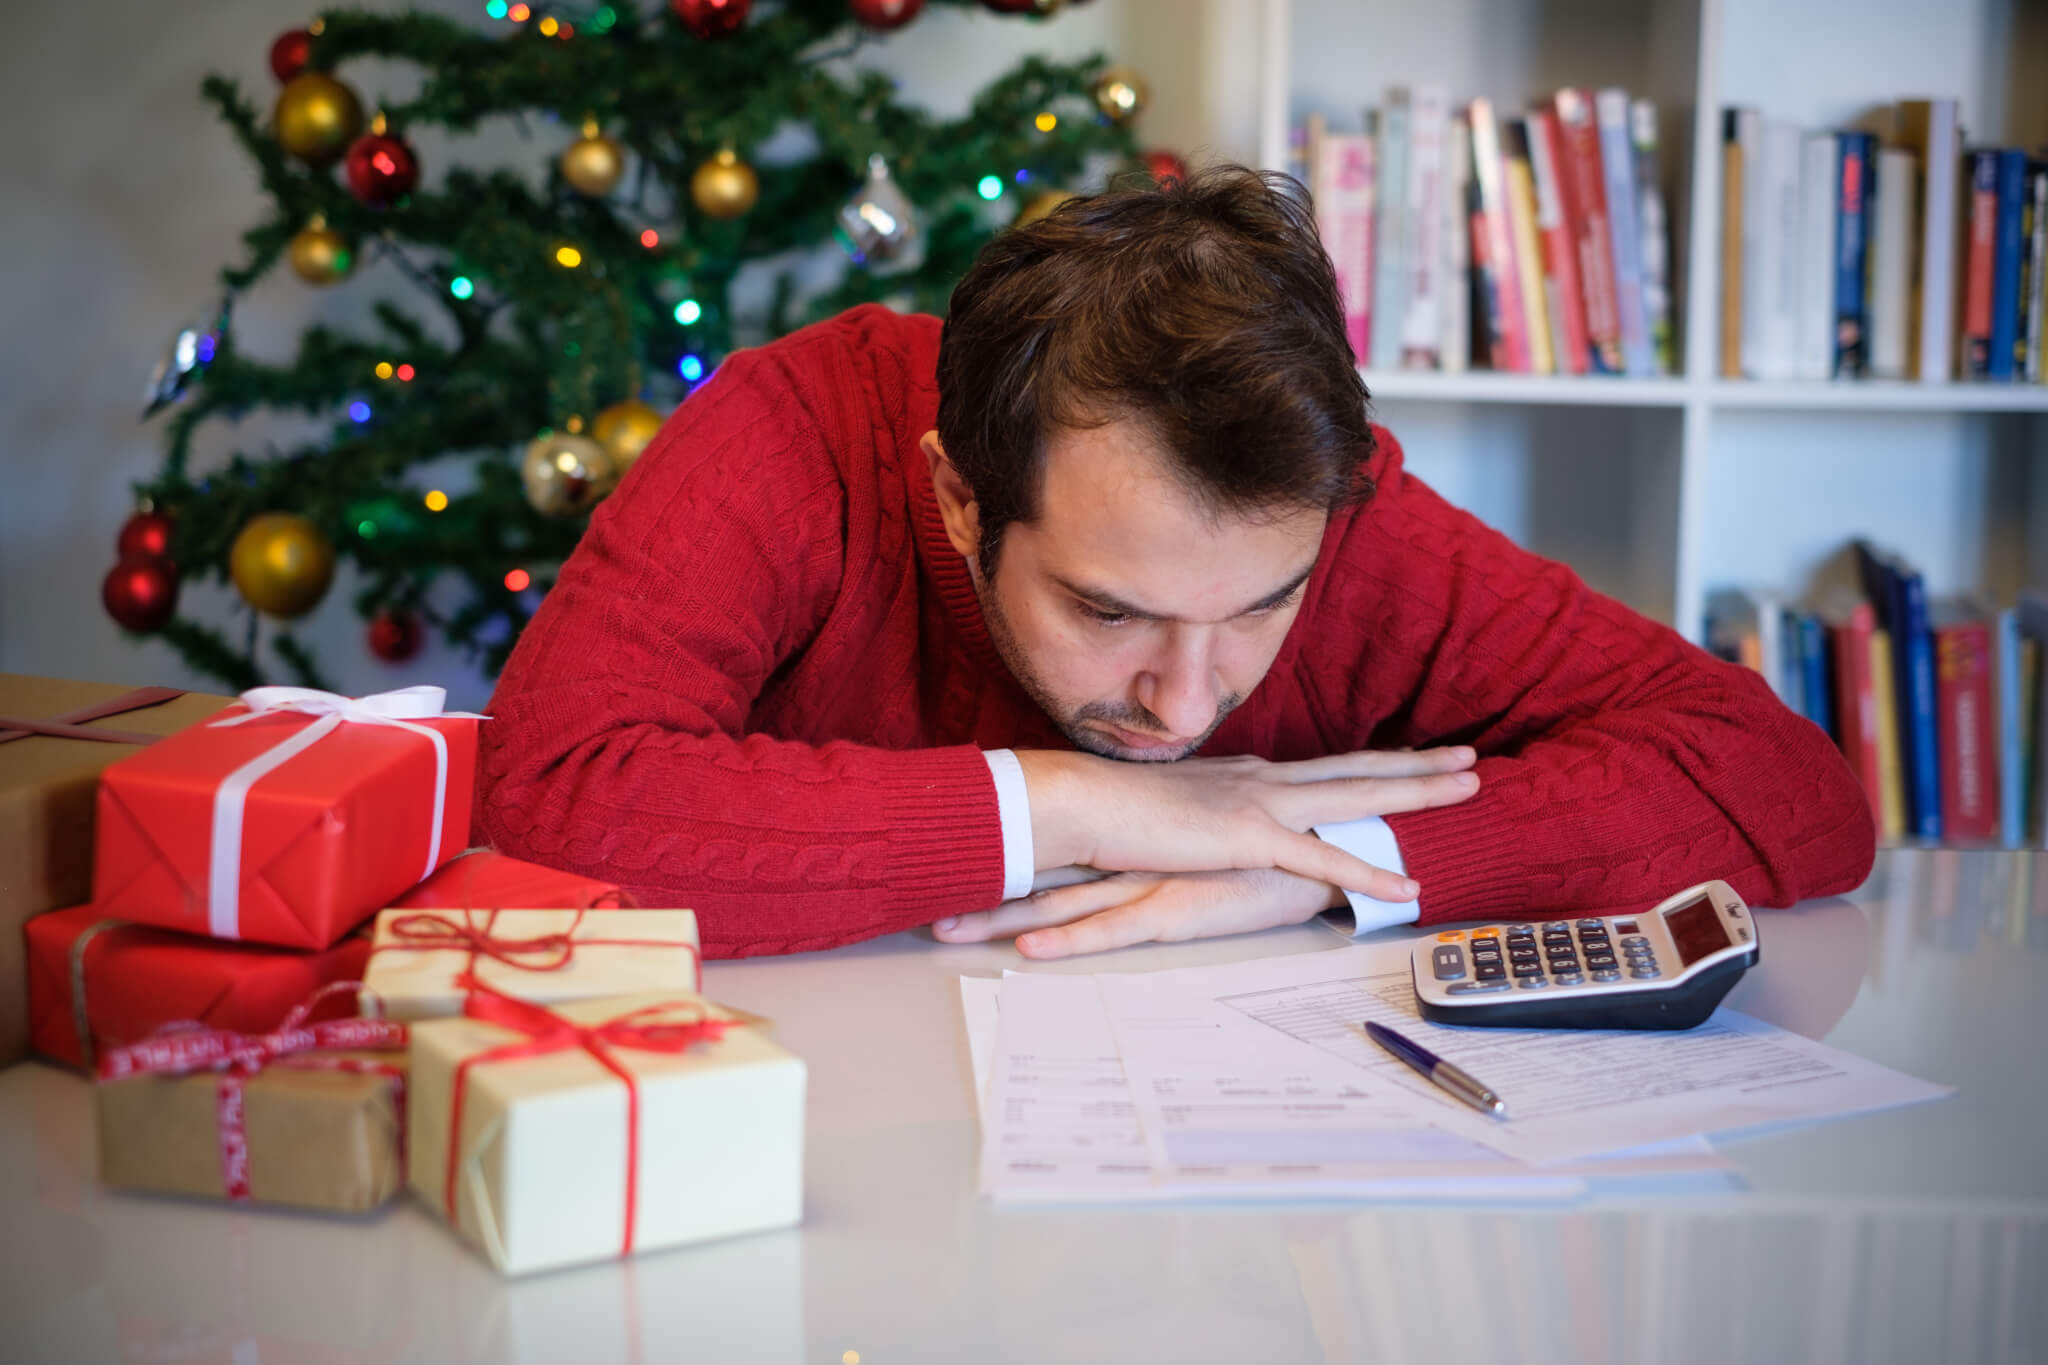 Man in debt from holiday spending, expenses